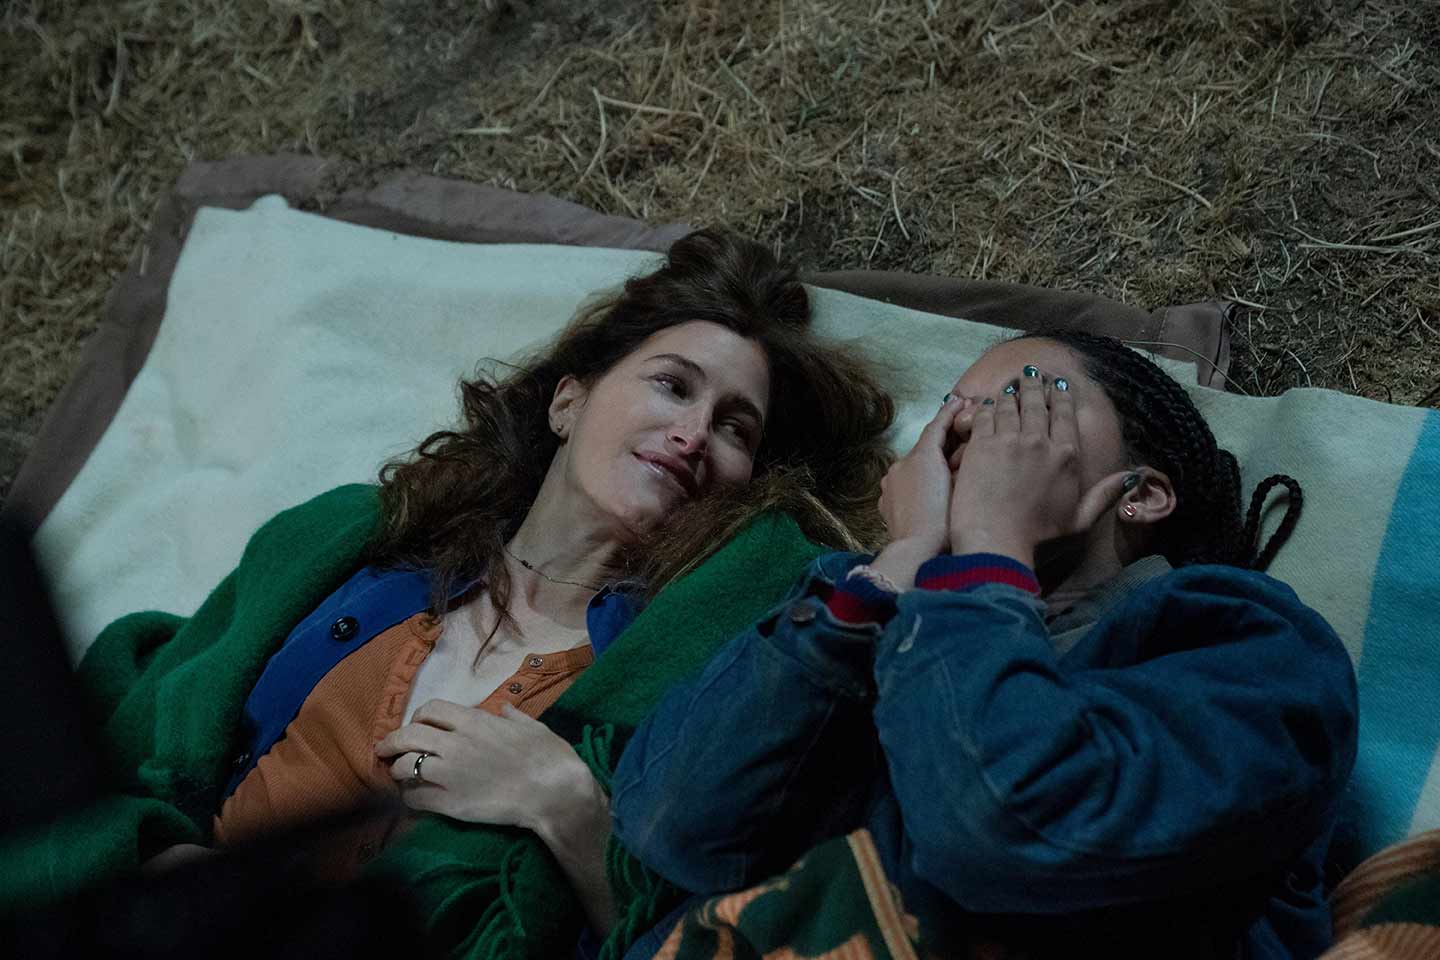 A still from the Hulu series "Tiny Beautiful Things" showing two women laying on a blanket in the grass